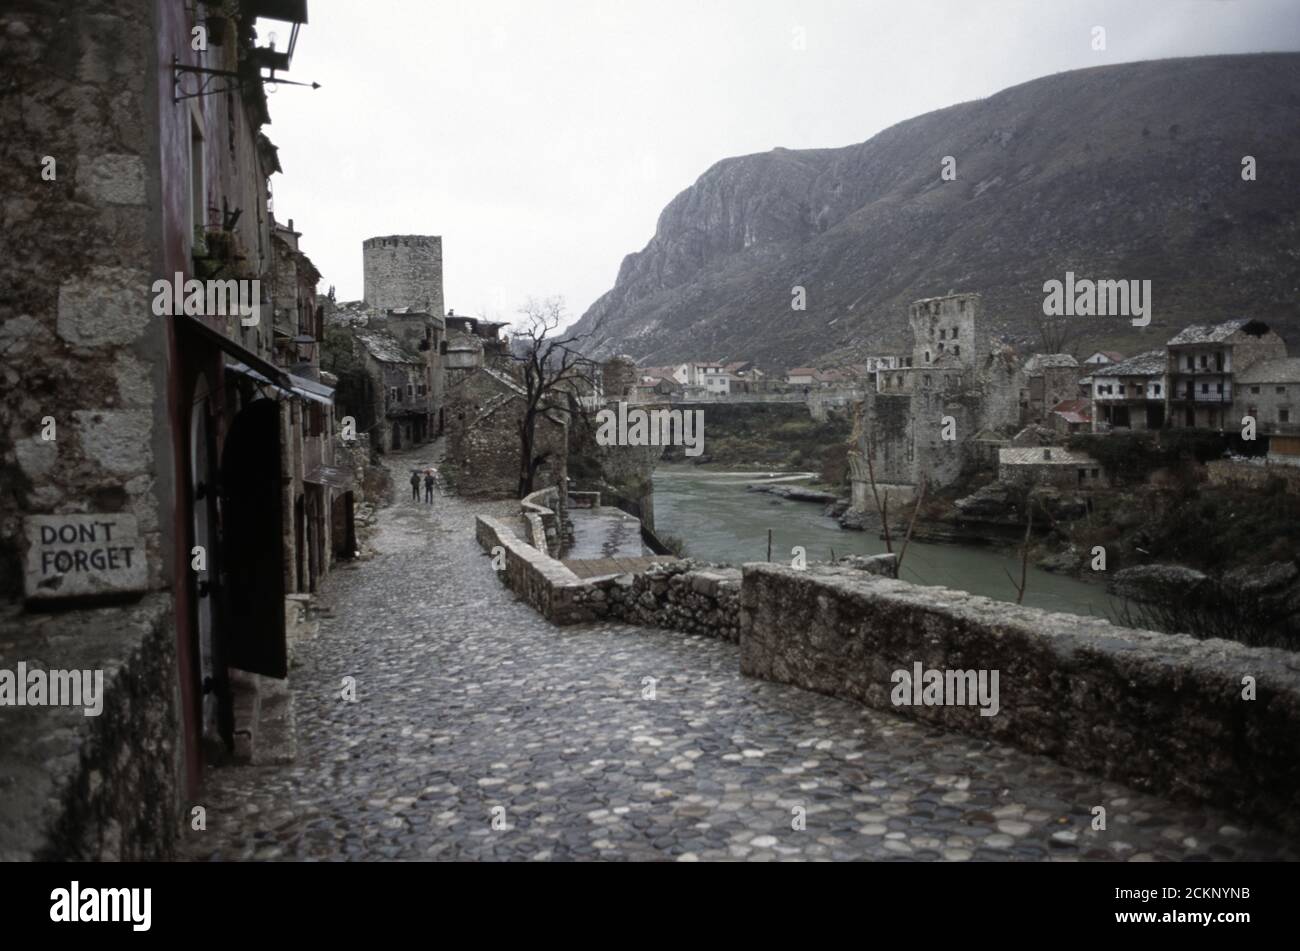 6th December 1995 During the war in Bosnia: the view along Kujundžiluk street towards the Stari Most (Old Bridge), and the Neretva River in Mostar. Stock Photo